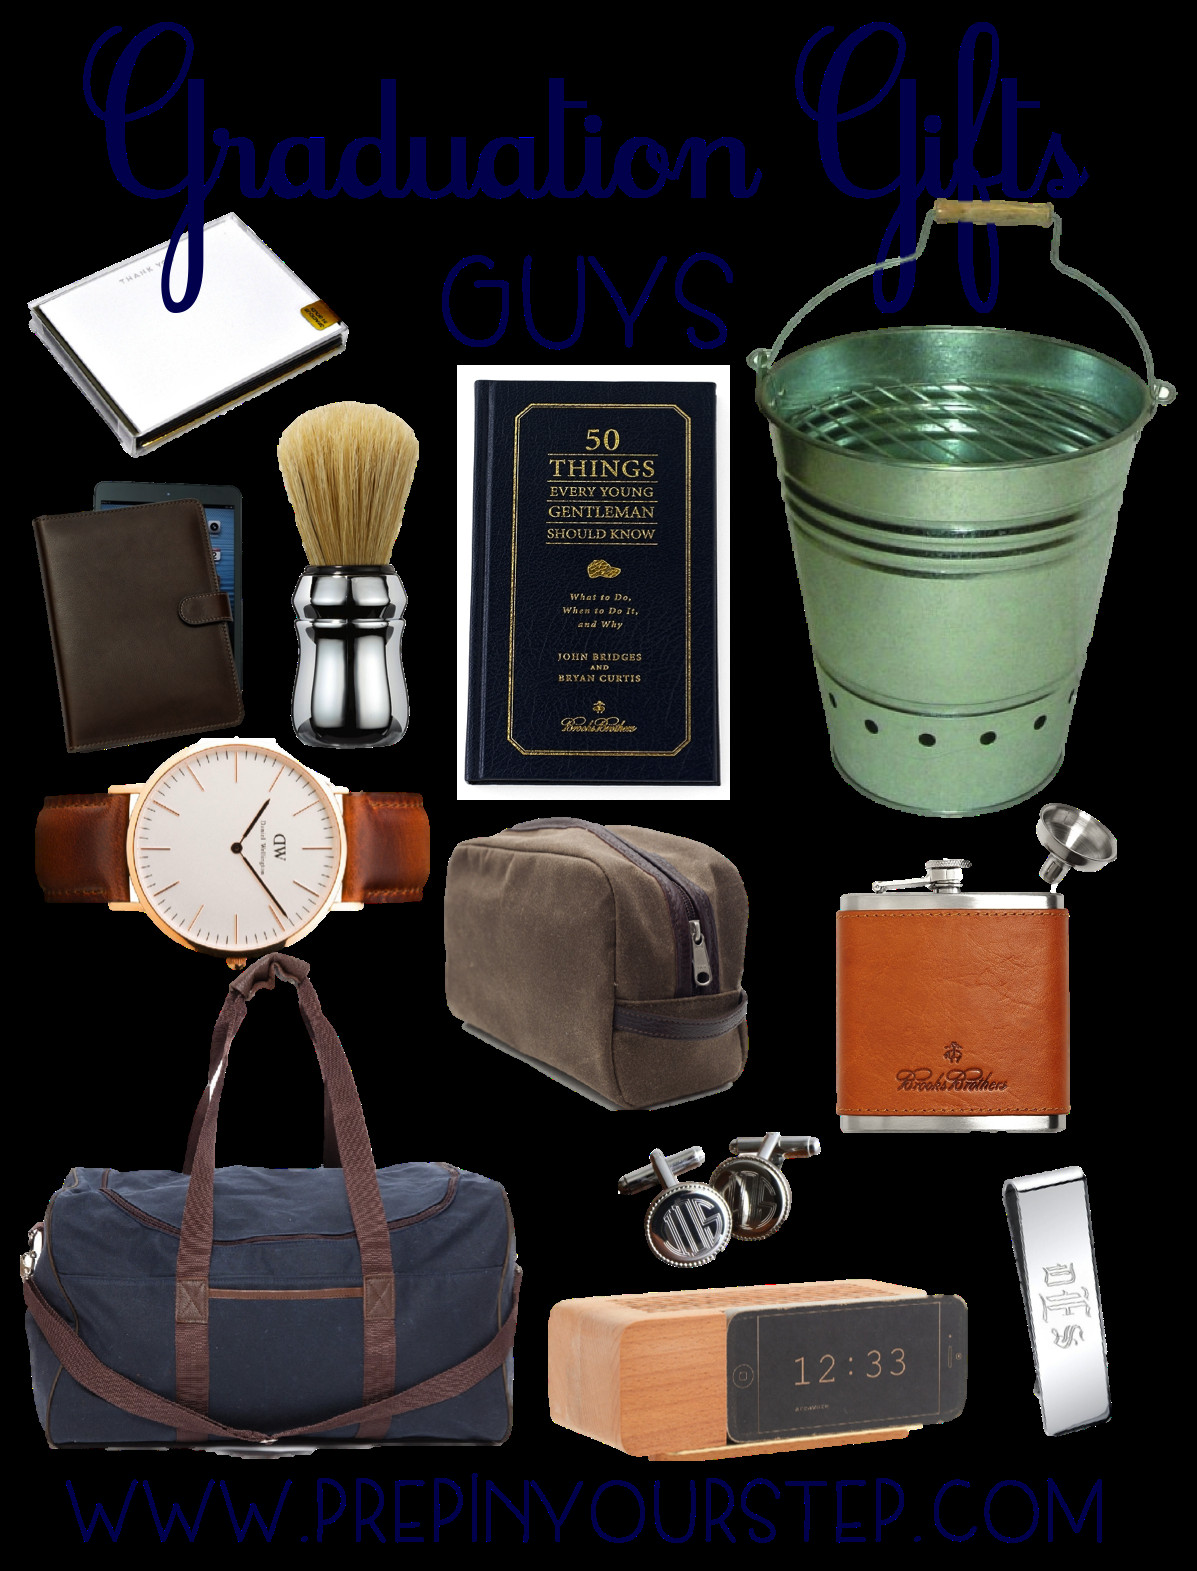 Guy Graduation Gift Ideas
 Prep In Your Step Graduation Gift Ideas Guys & Girls